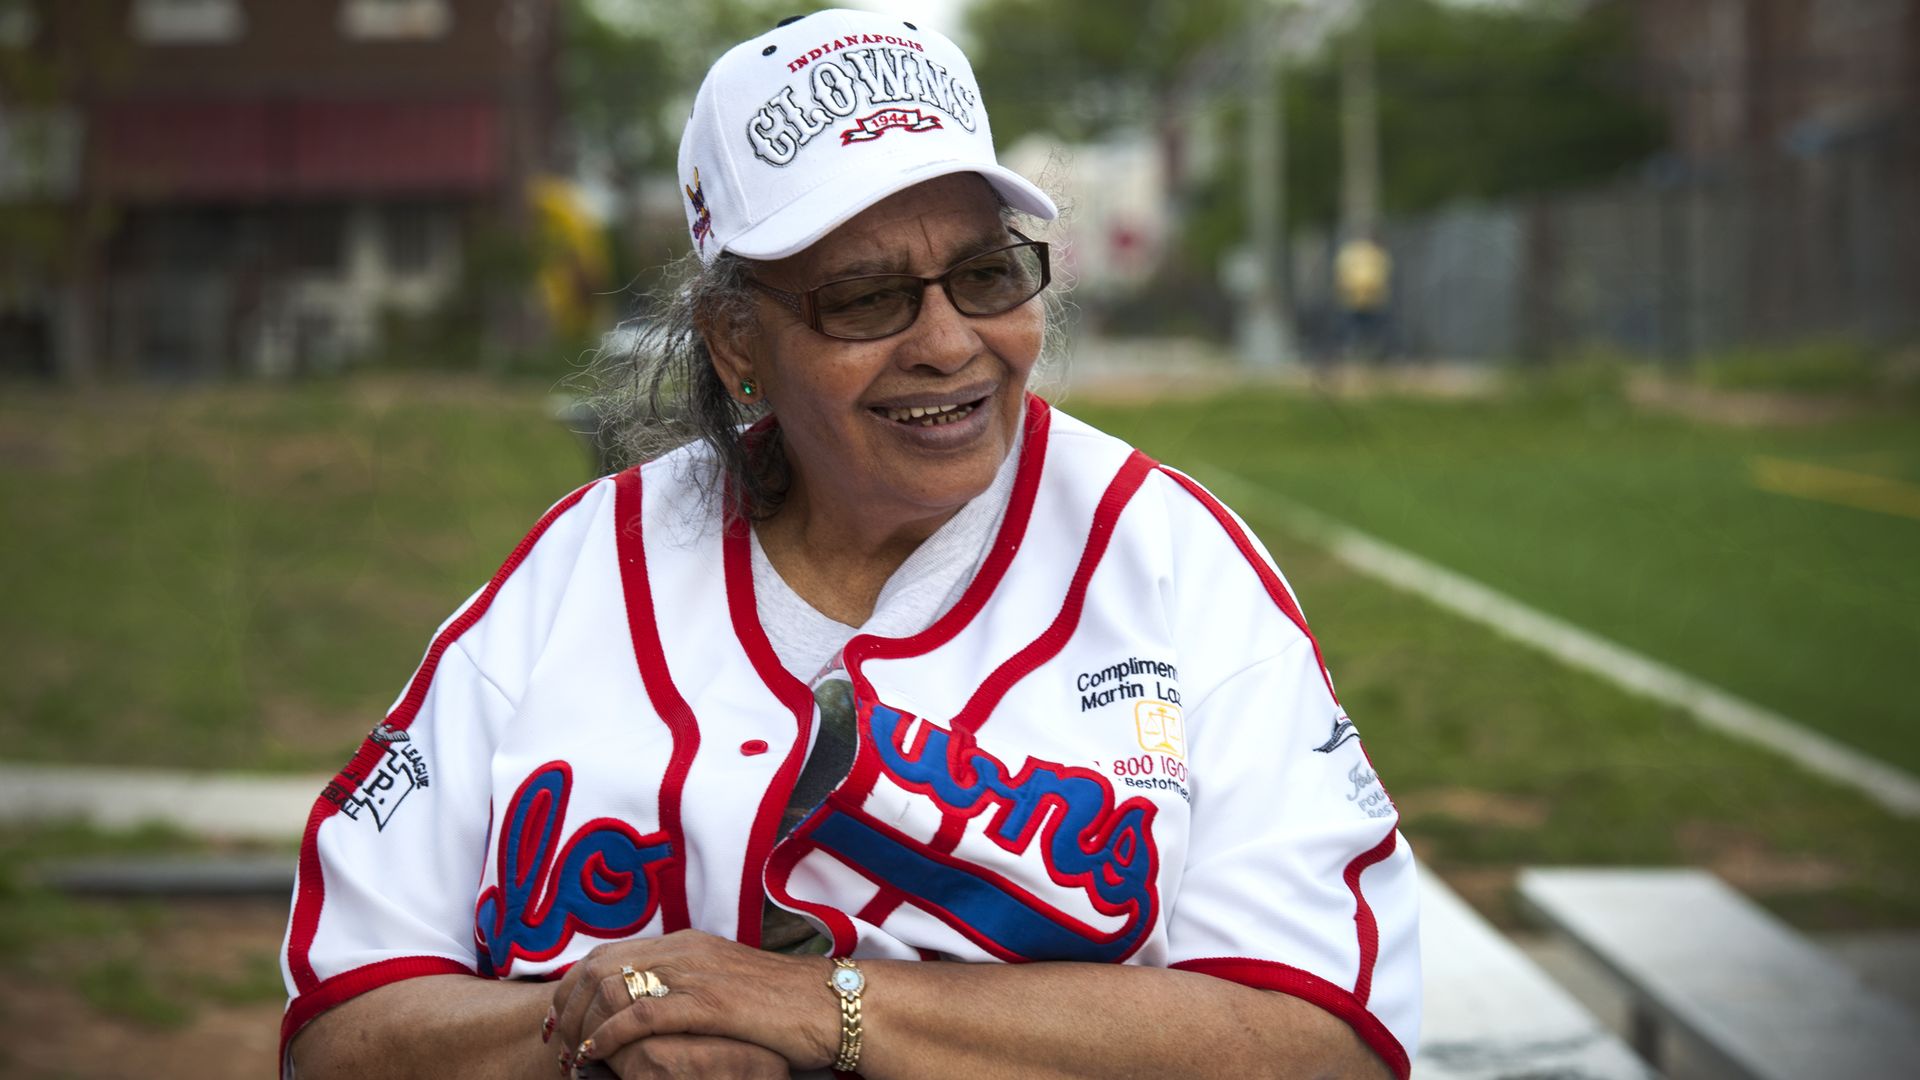 A 2013 photo of Mamie "Peanut" Johnson in an Indianapolis Clowns jersey.